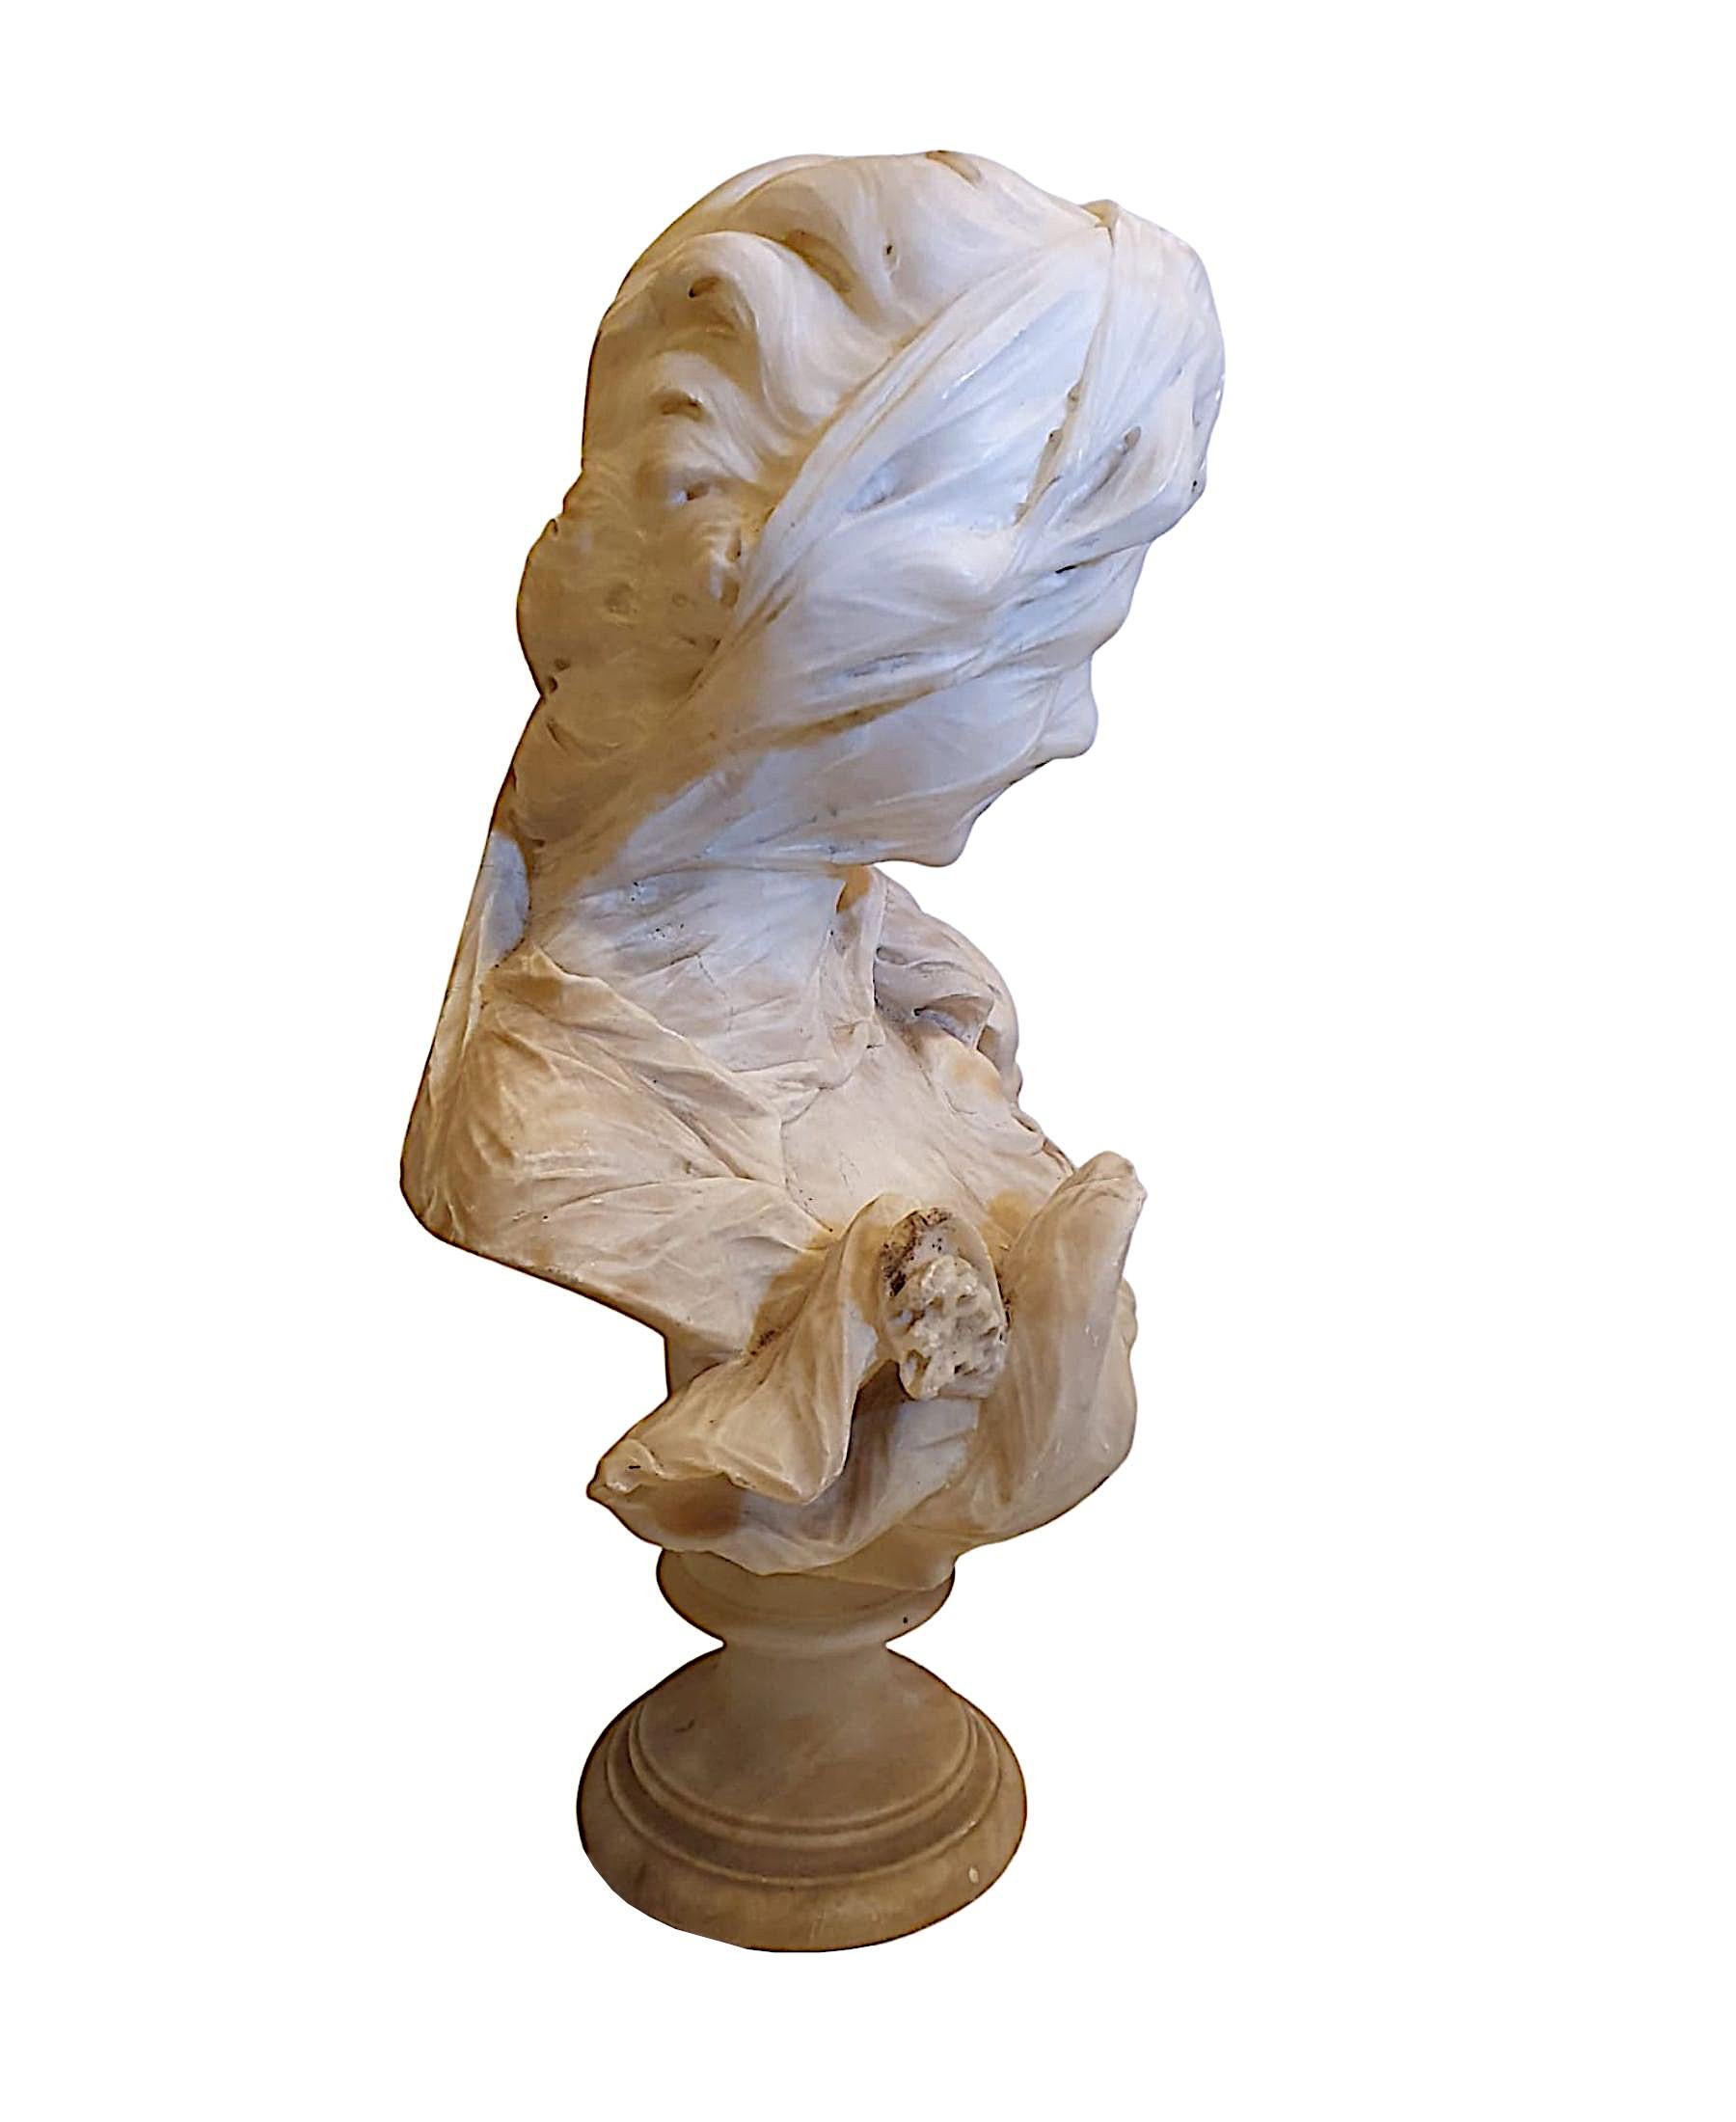 A lovely quality 19th century beautifully carved alabaster bust of a lady, de-picted smiling with a sheer veil obscuring her face and with hair tumbling over one shoulder supported on socle base, unsigned.